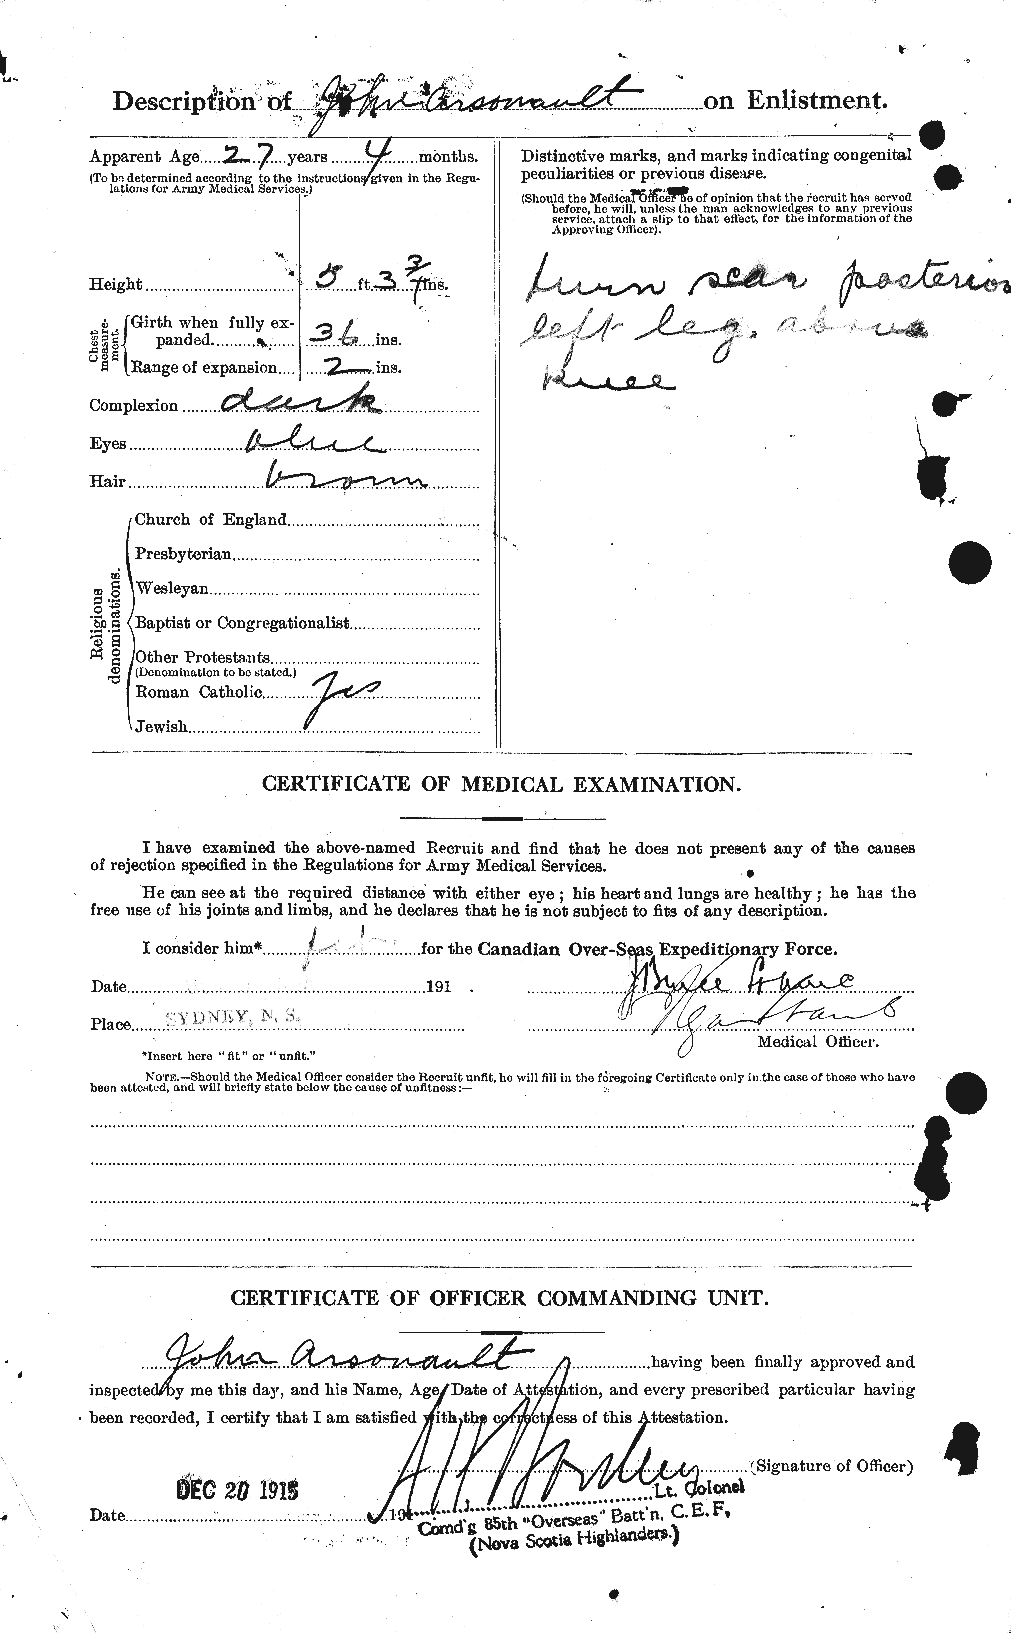 Personnel Records of the First World War - CEF 214132b